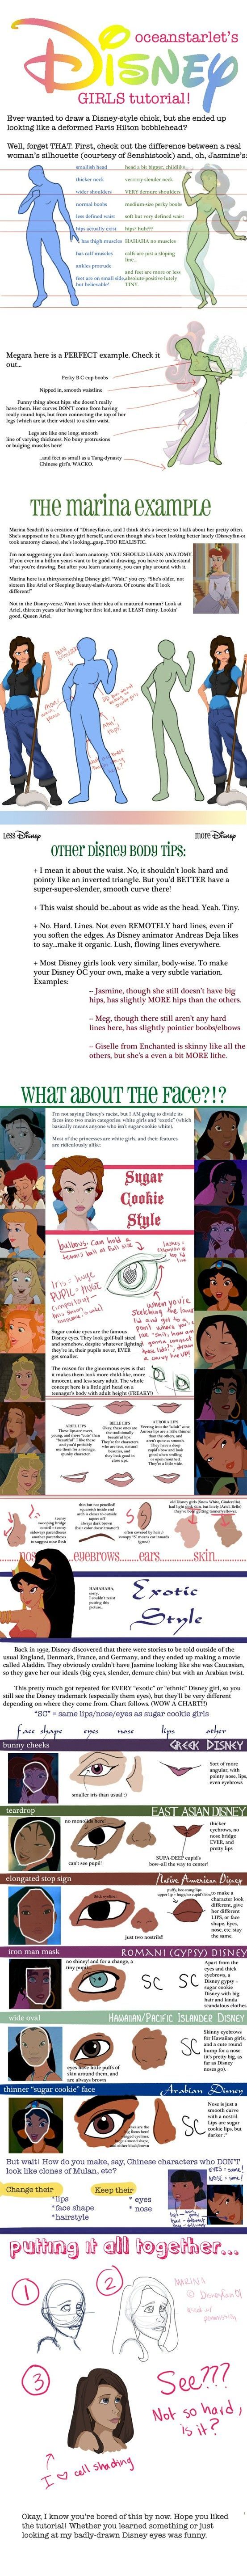 :Specifics of drawing Disney” i actually find this funny. I have av friend who has drawings of Disney princesses that are perfect